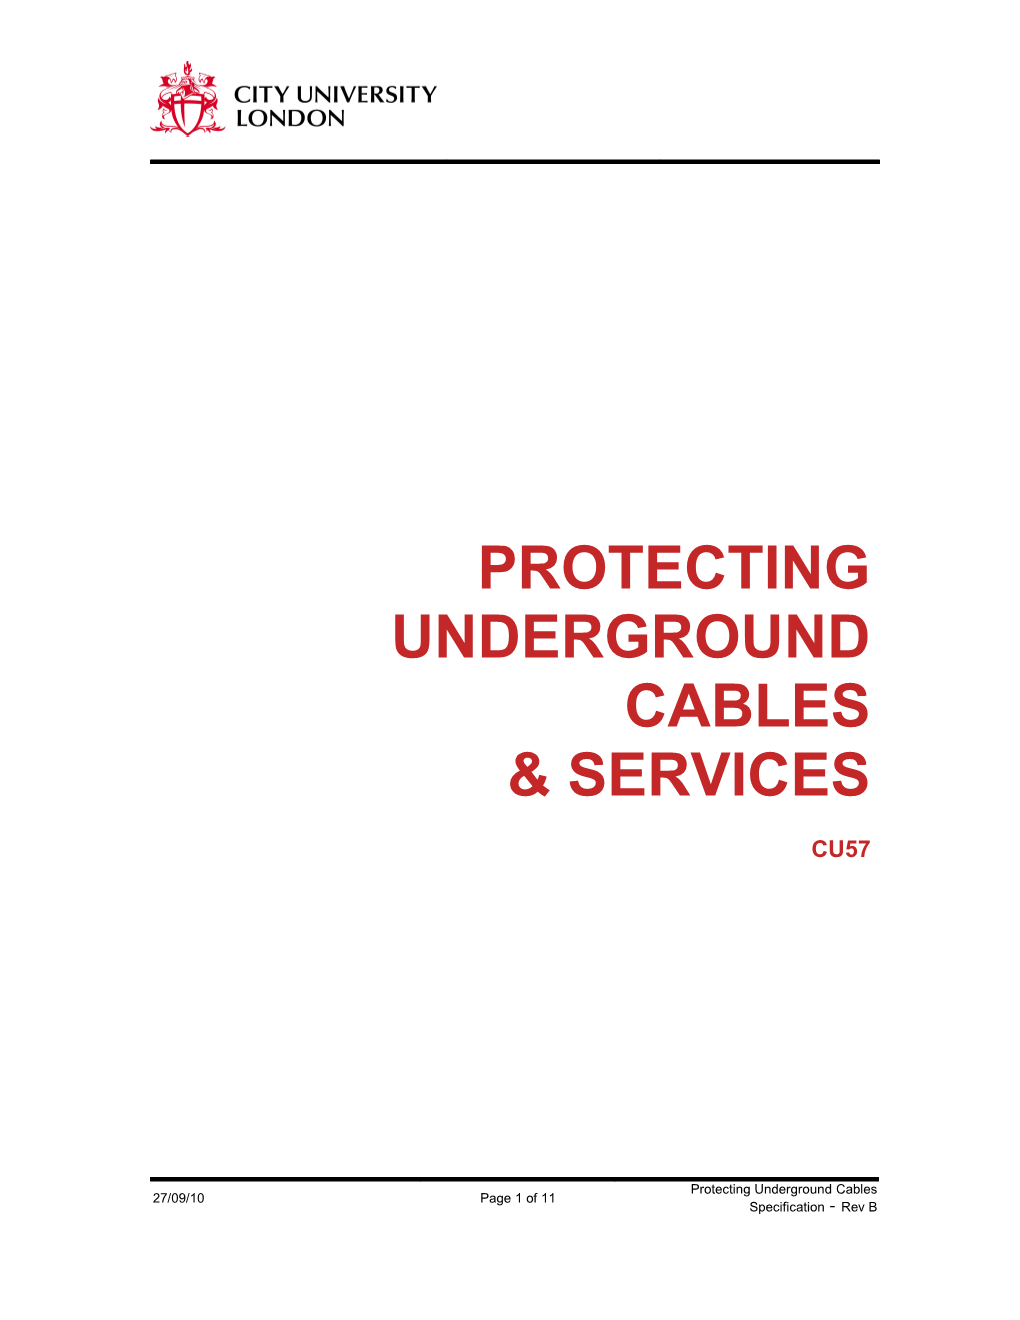 Protecting Underground Cables